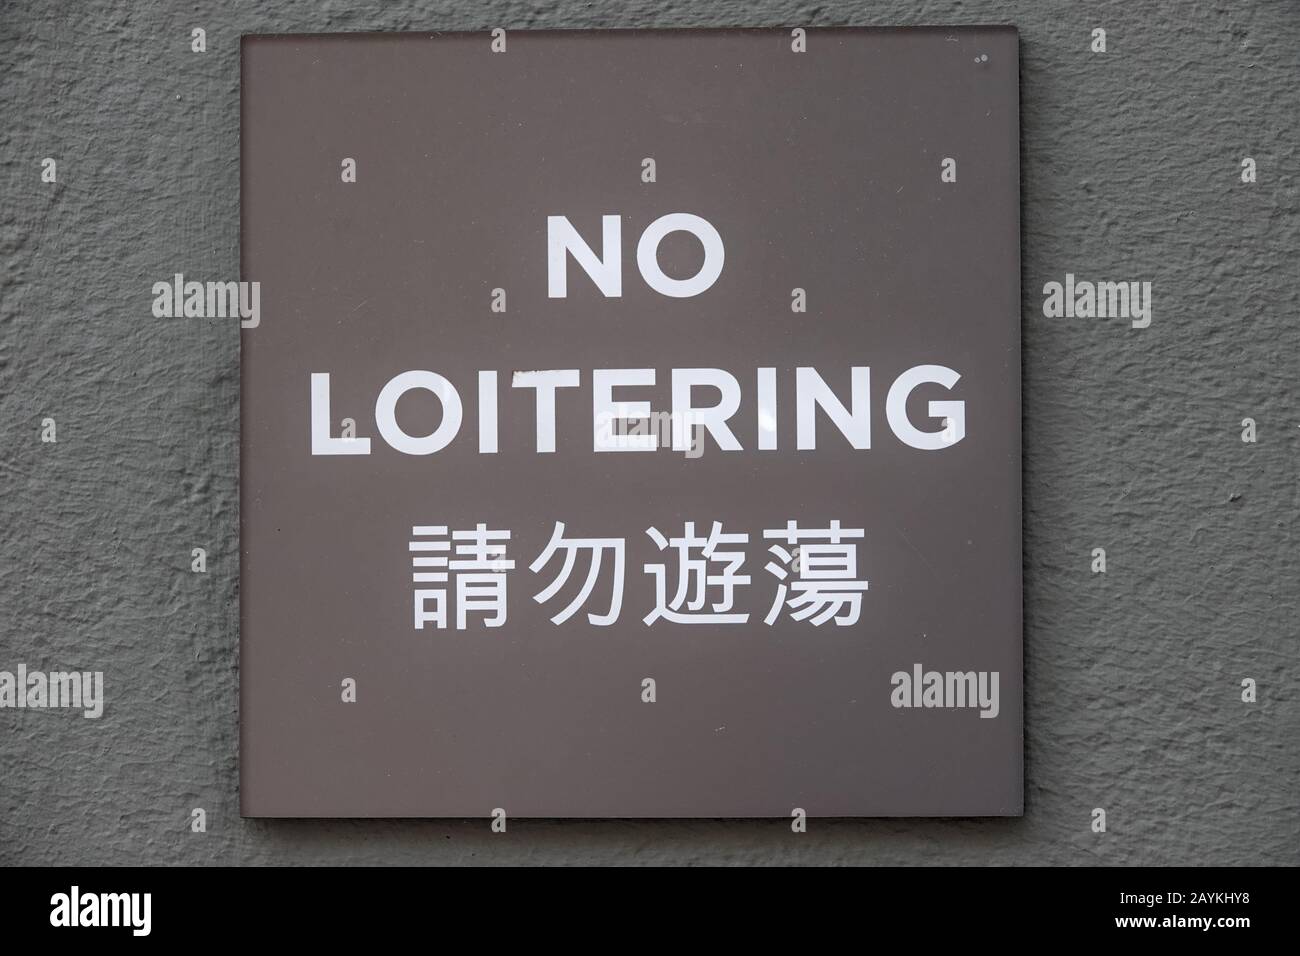 'No loitering' sign in English and Chinese, San Francisco Chinatown Stock Photo